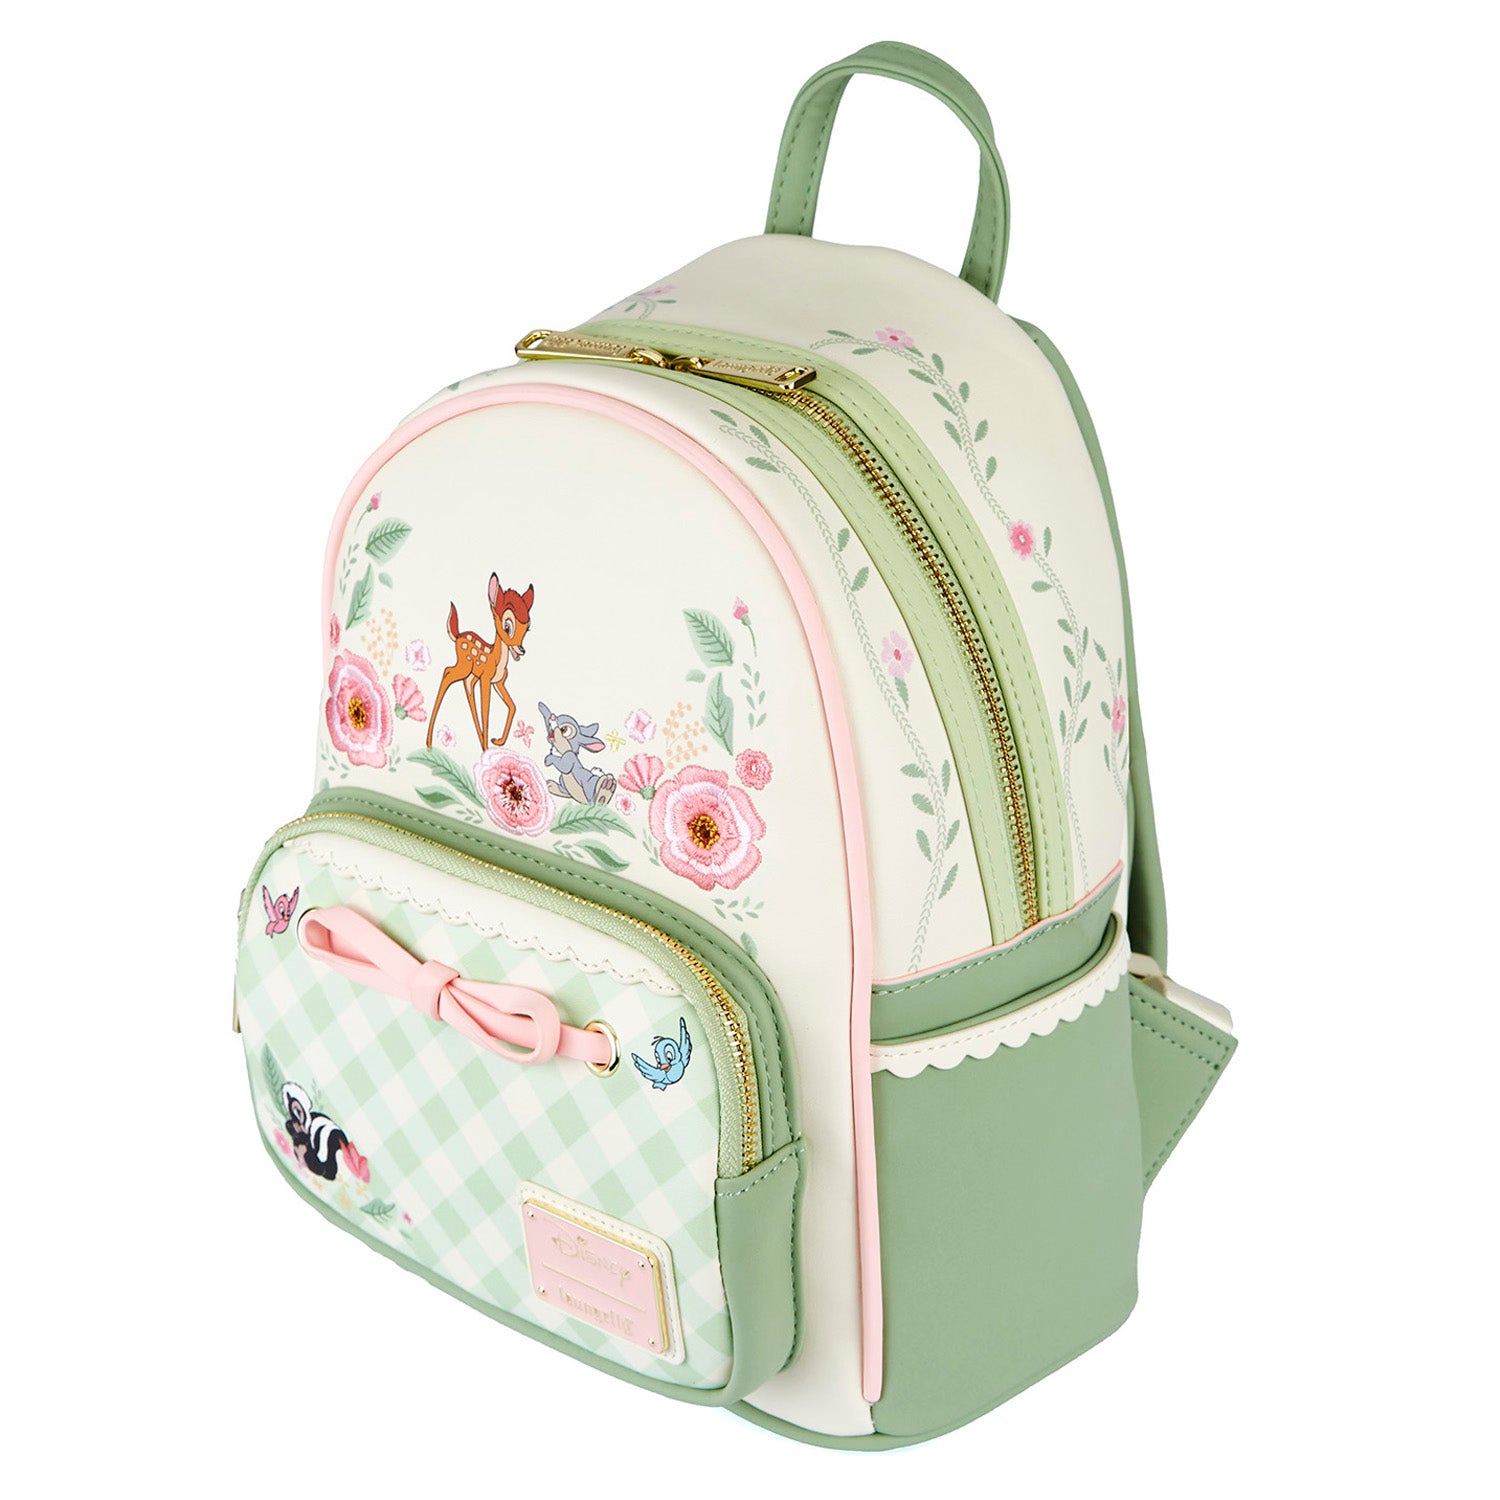 Camel Check Mini Backpack – Happy Baby Boutique